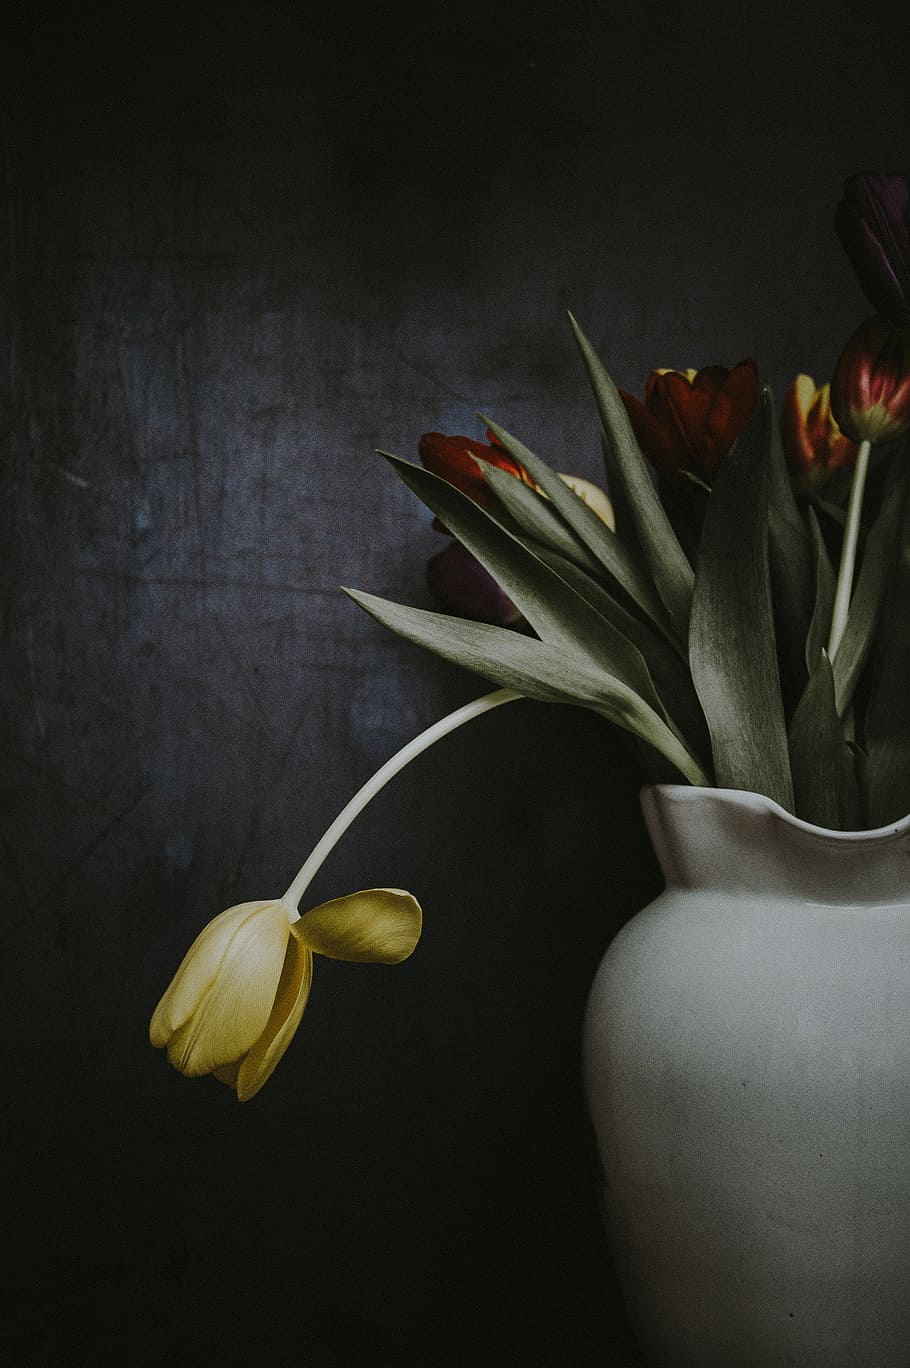 Hd Wallpaper Tulips On Dark Background Closeup Photo Of Red And Yellow Tulip Flowers On Vase Wallpaper Flare